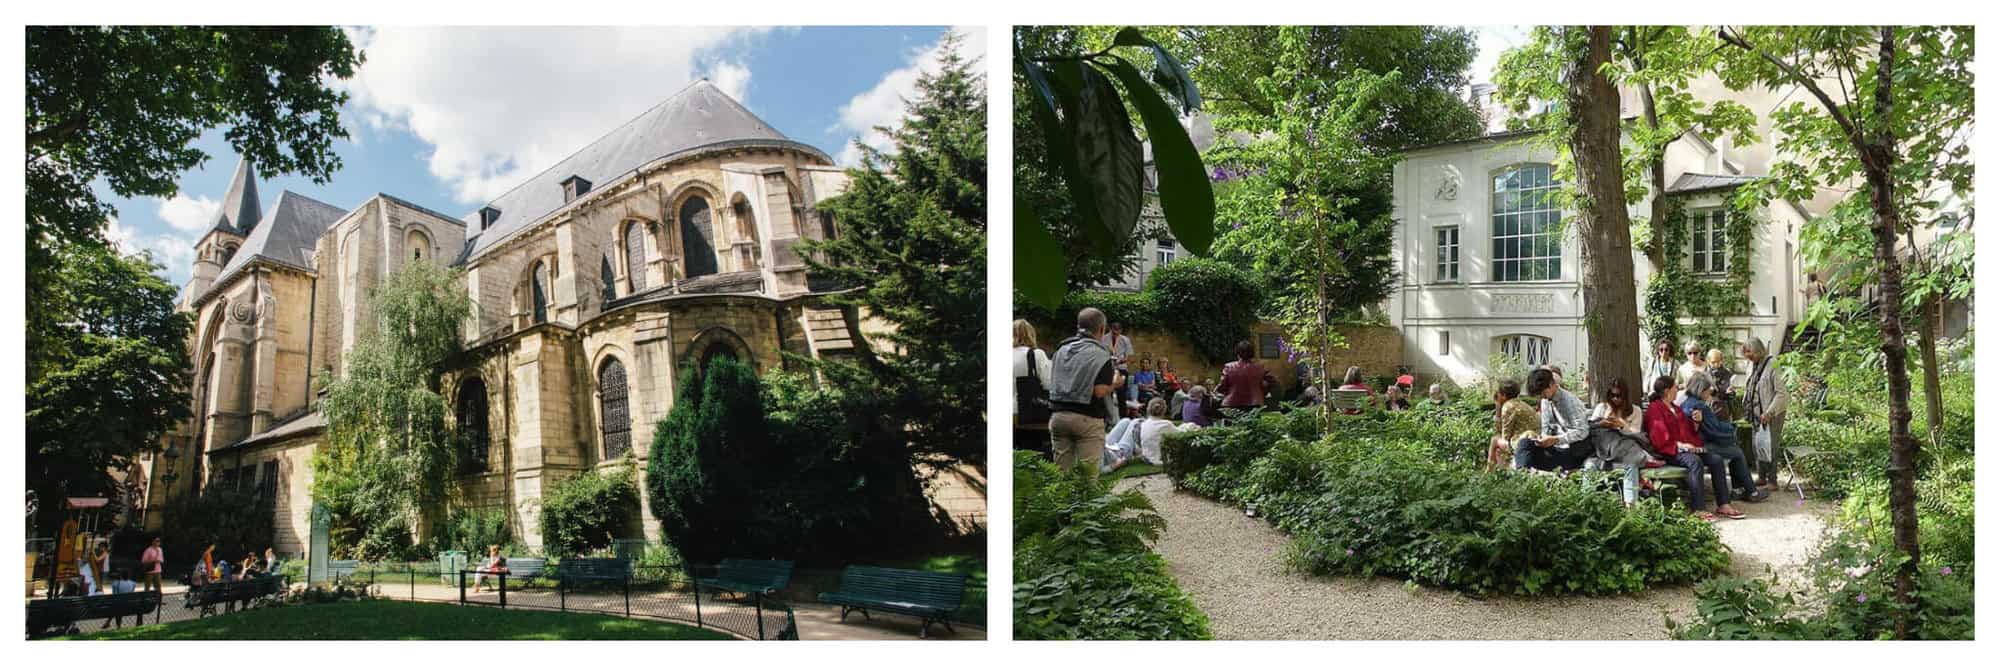 Left: Saint-Germain-des-Prés church with a small square with greenery and park benches in front of it. Right: The Musée Delacroix courtyard outside the museum. There is a lot of greenery and trees with people sitting on benches.